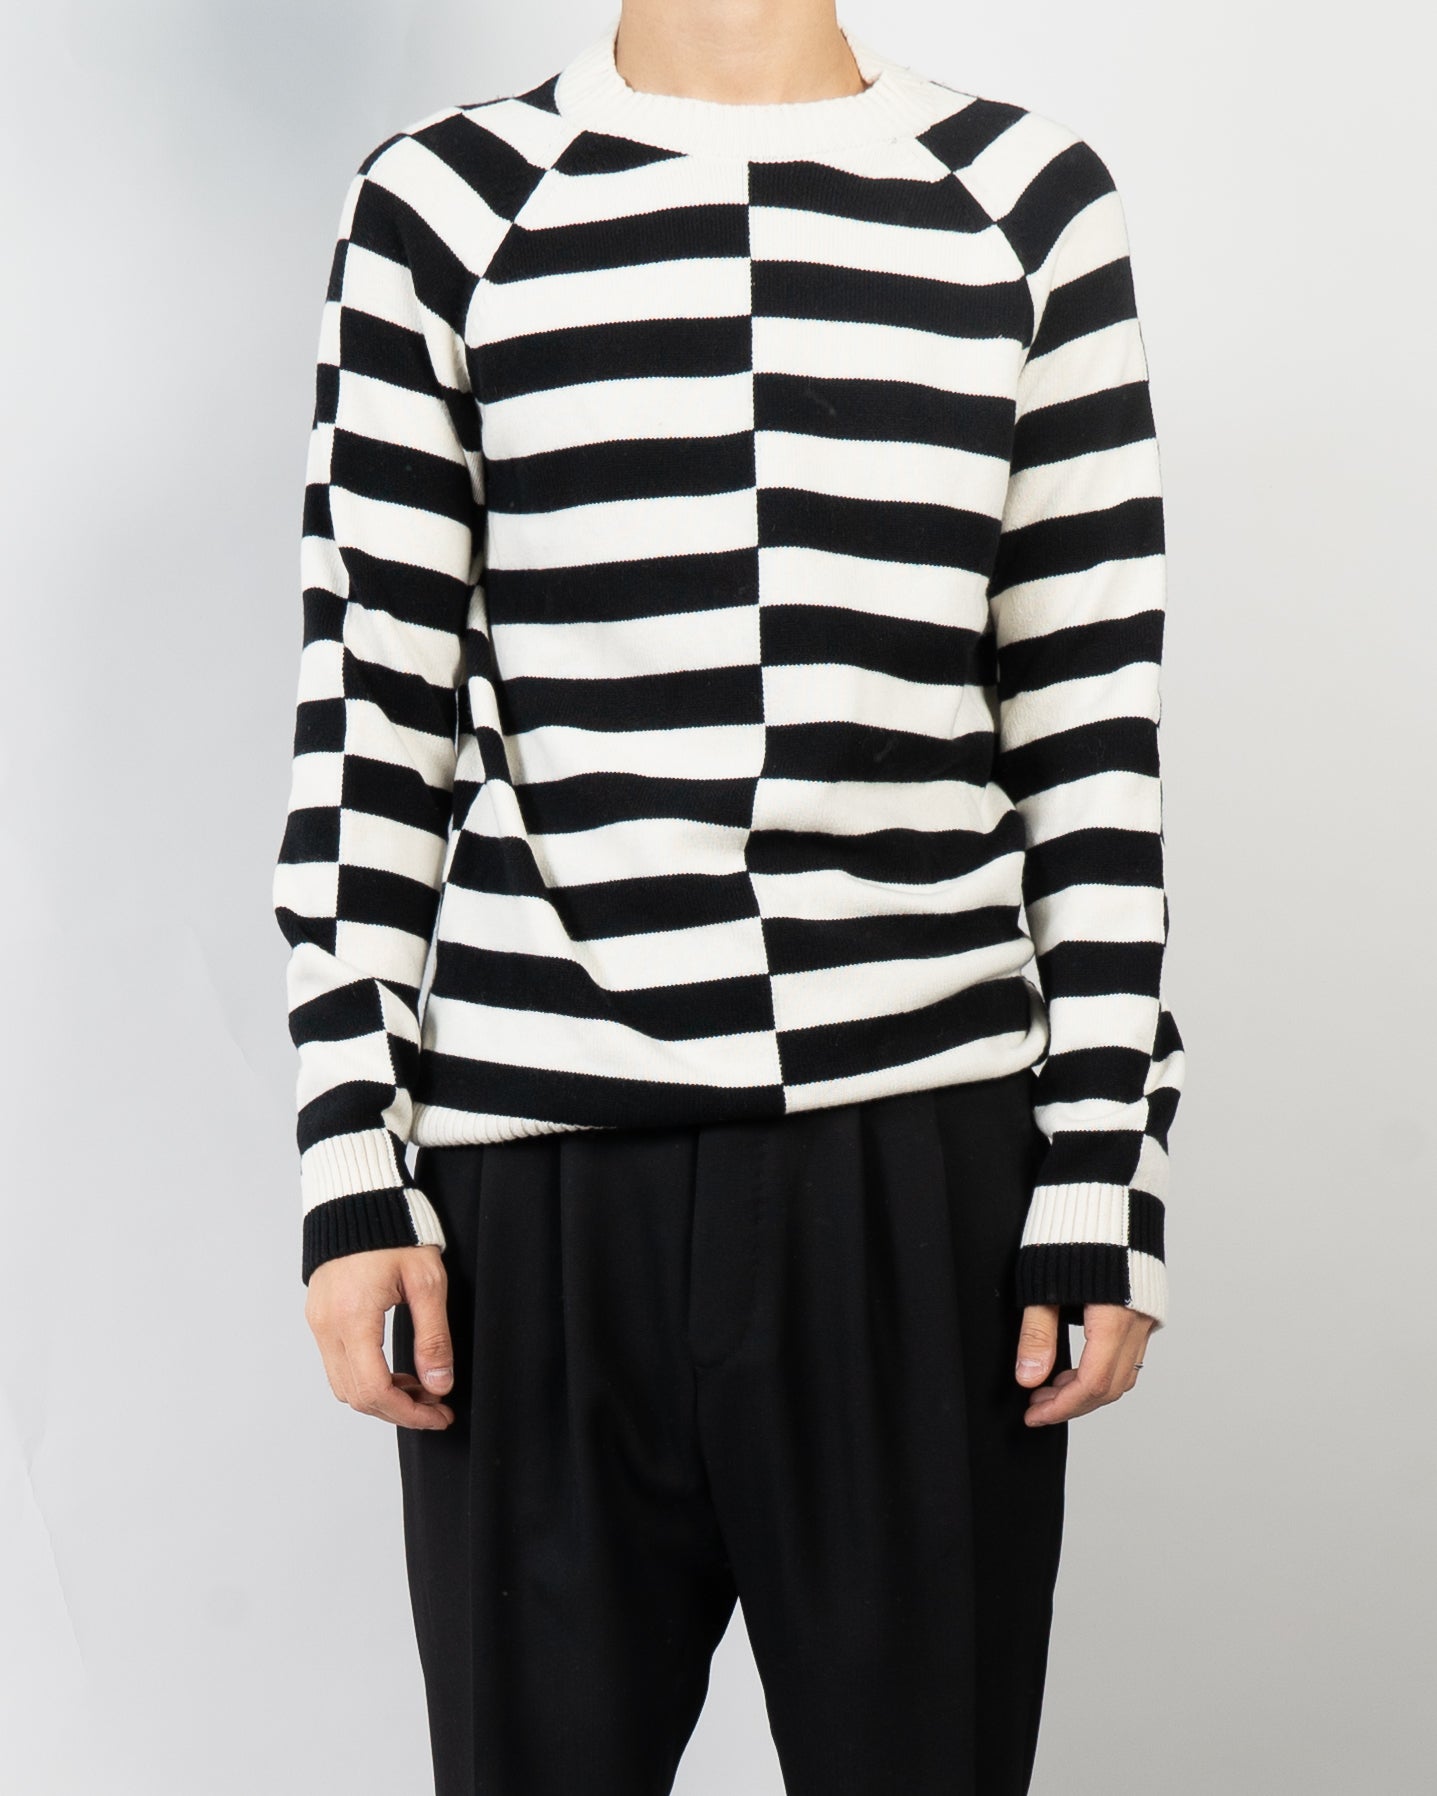 FW15 Striped Knit Sample